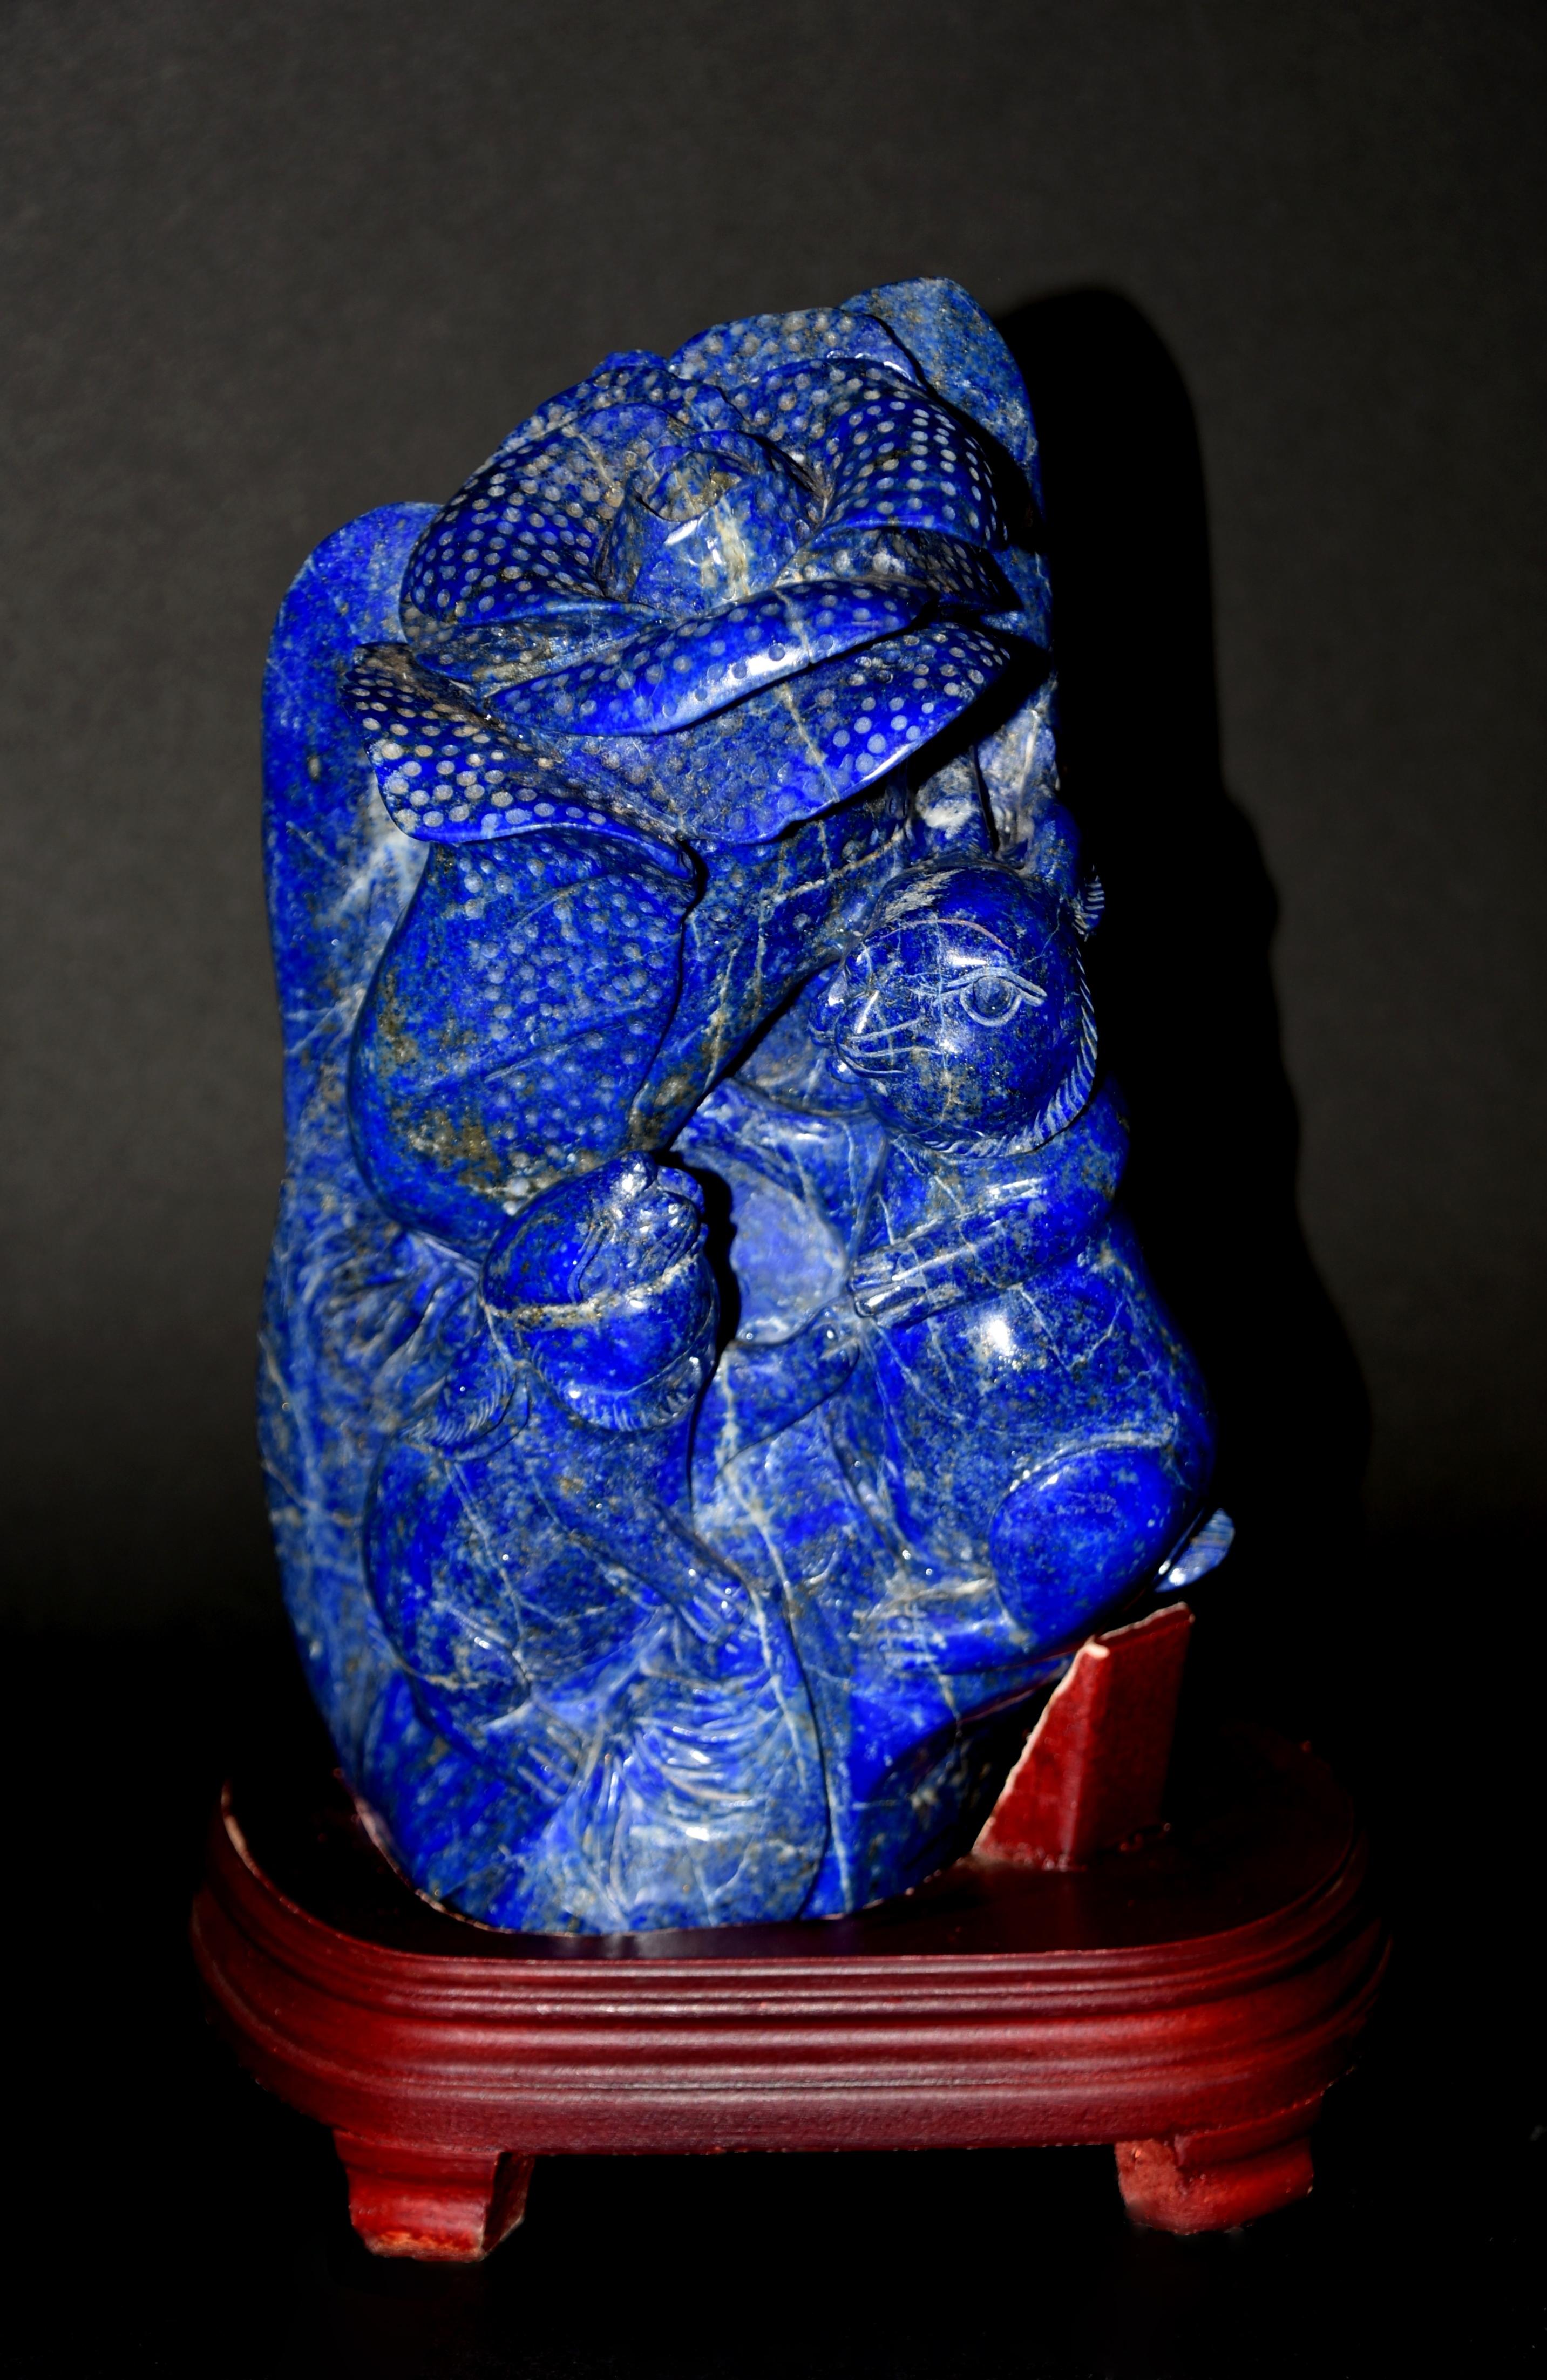 A substantial 7.25 lb natural lapis lazuli sculpture of 2 rabbits surrounding a Bok Choi symbolizing great wealth and good fortune. The statue is hand carved using the finest grade of natural gemstone quality lapis lazuli with beautiful saturated